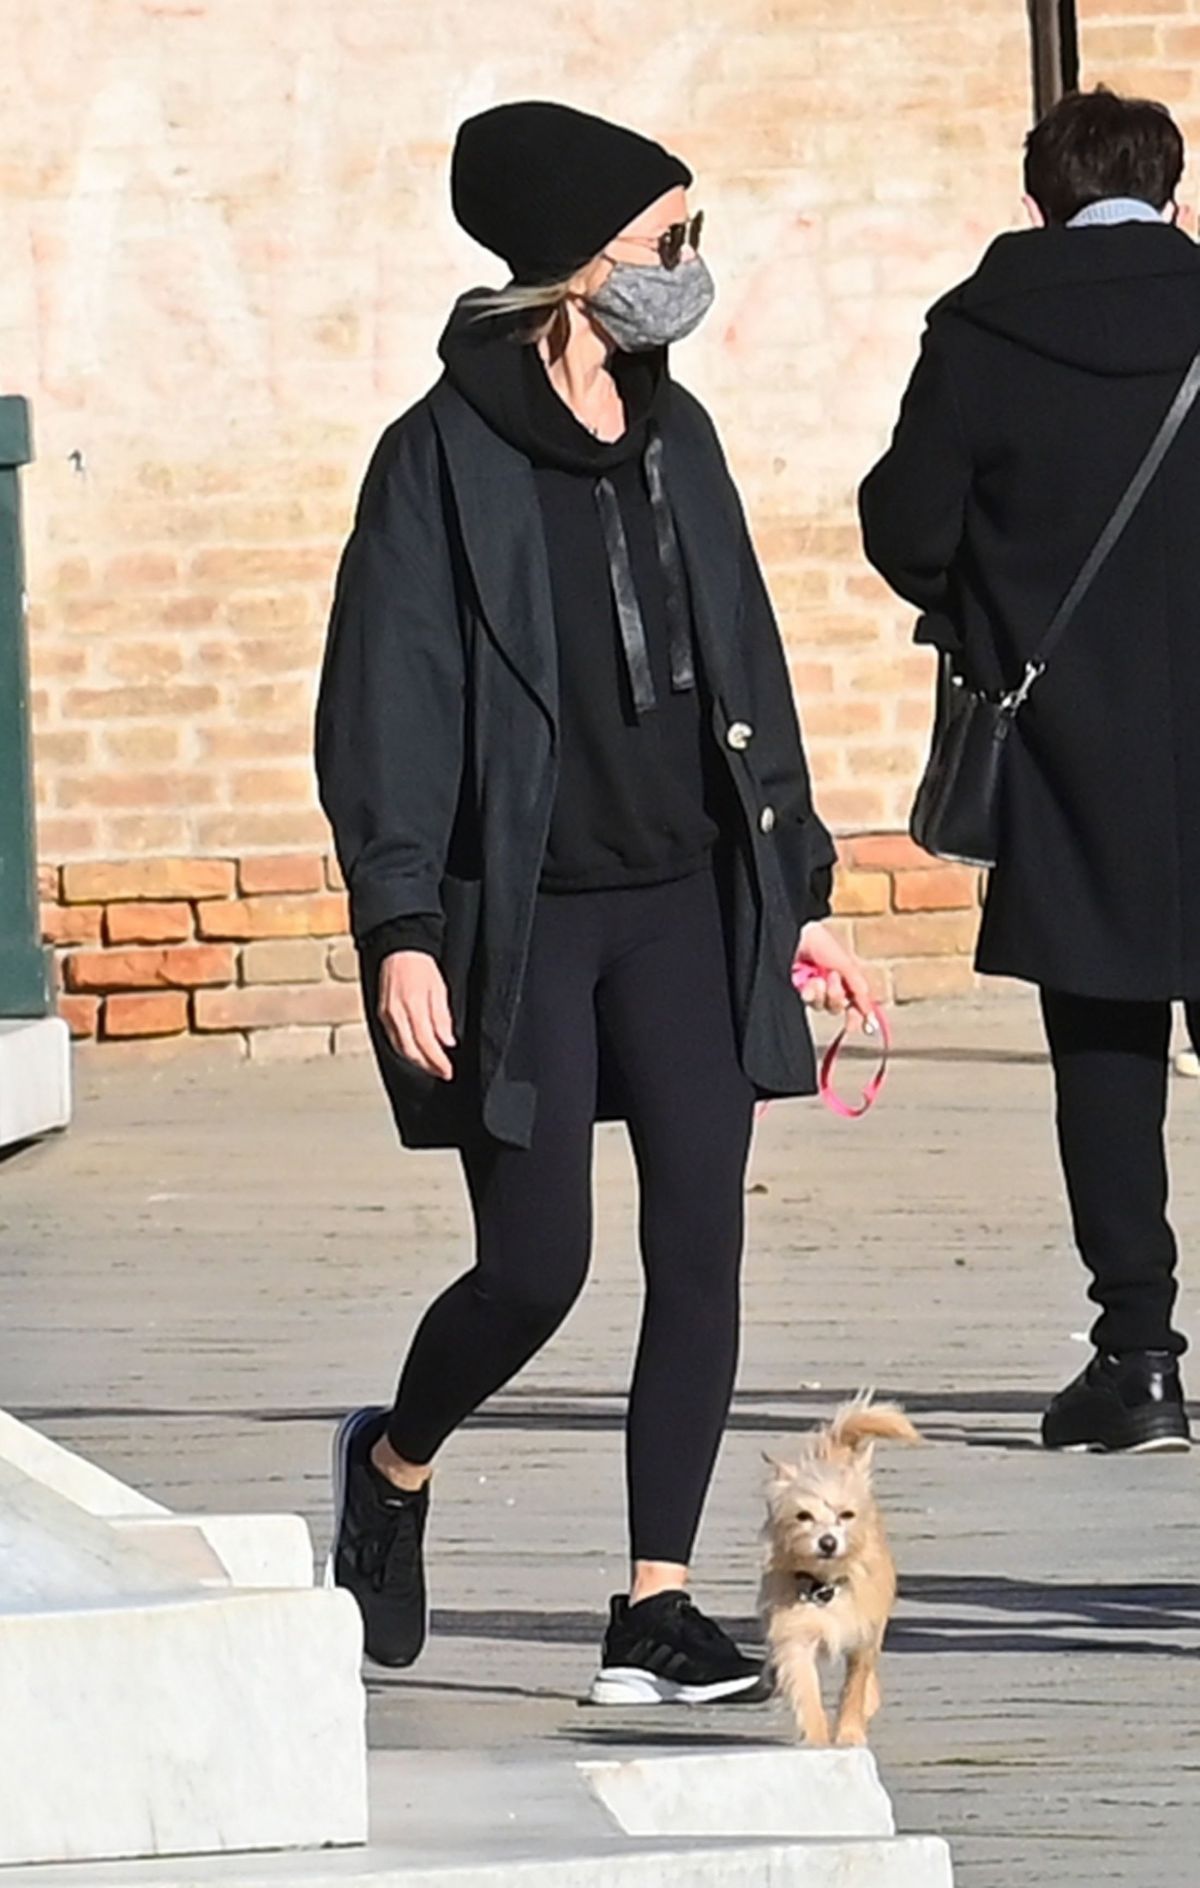 naomi-watts-out-with-her-dog-in-venice-01-08-2021-0.jpg